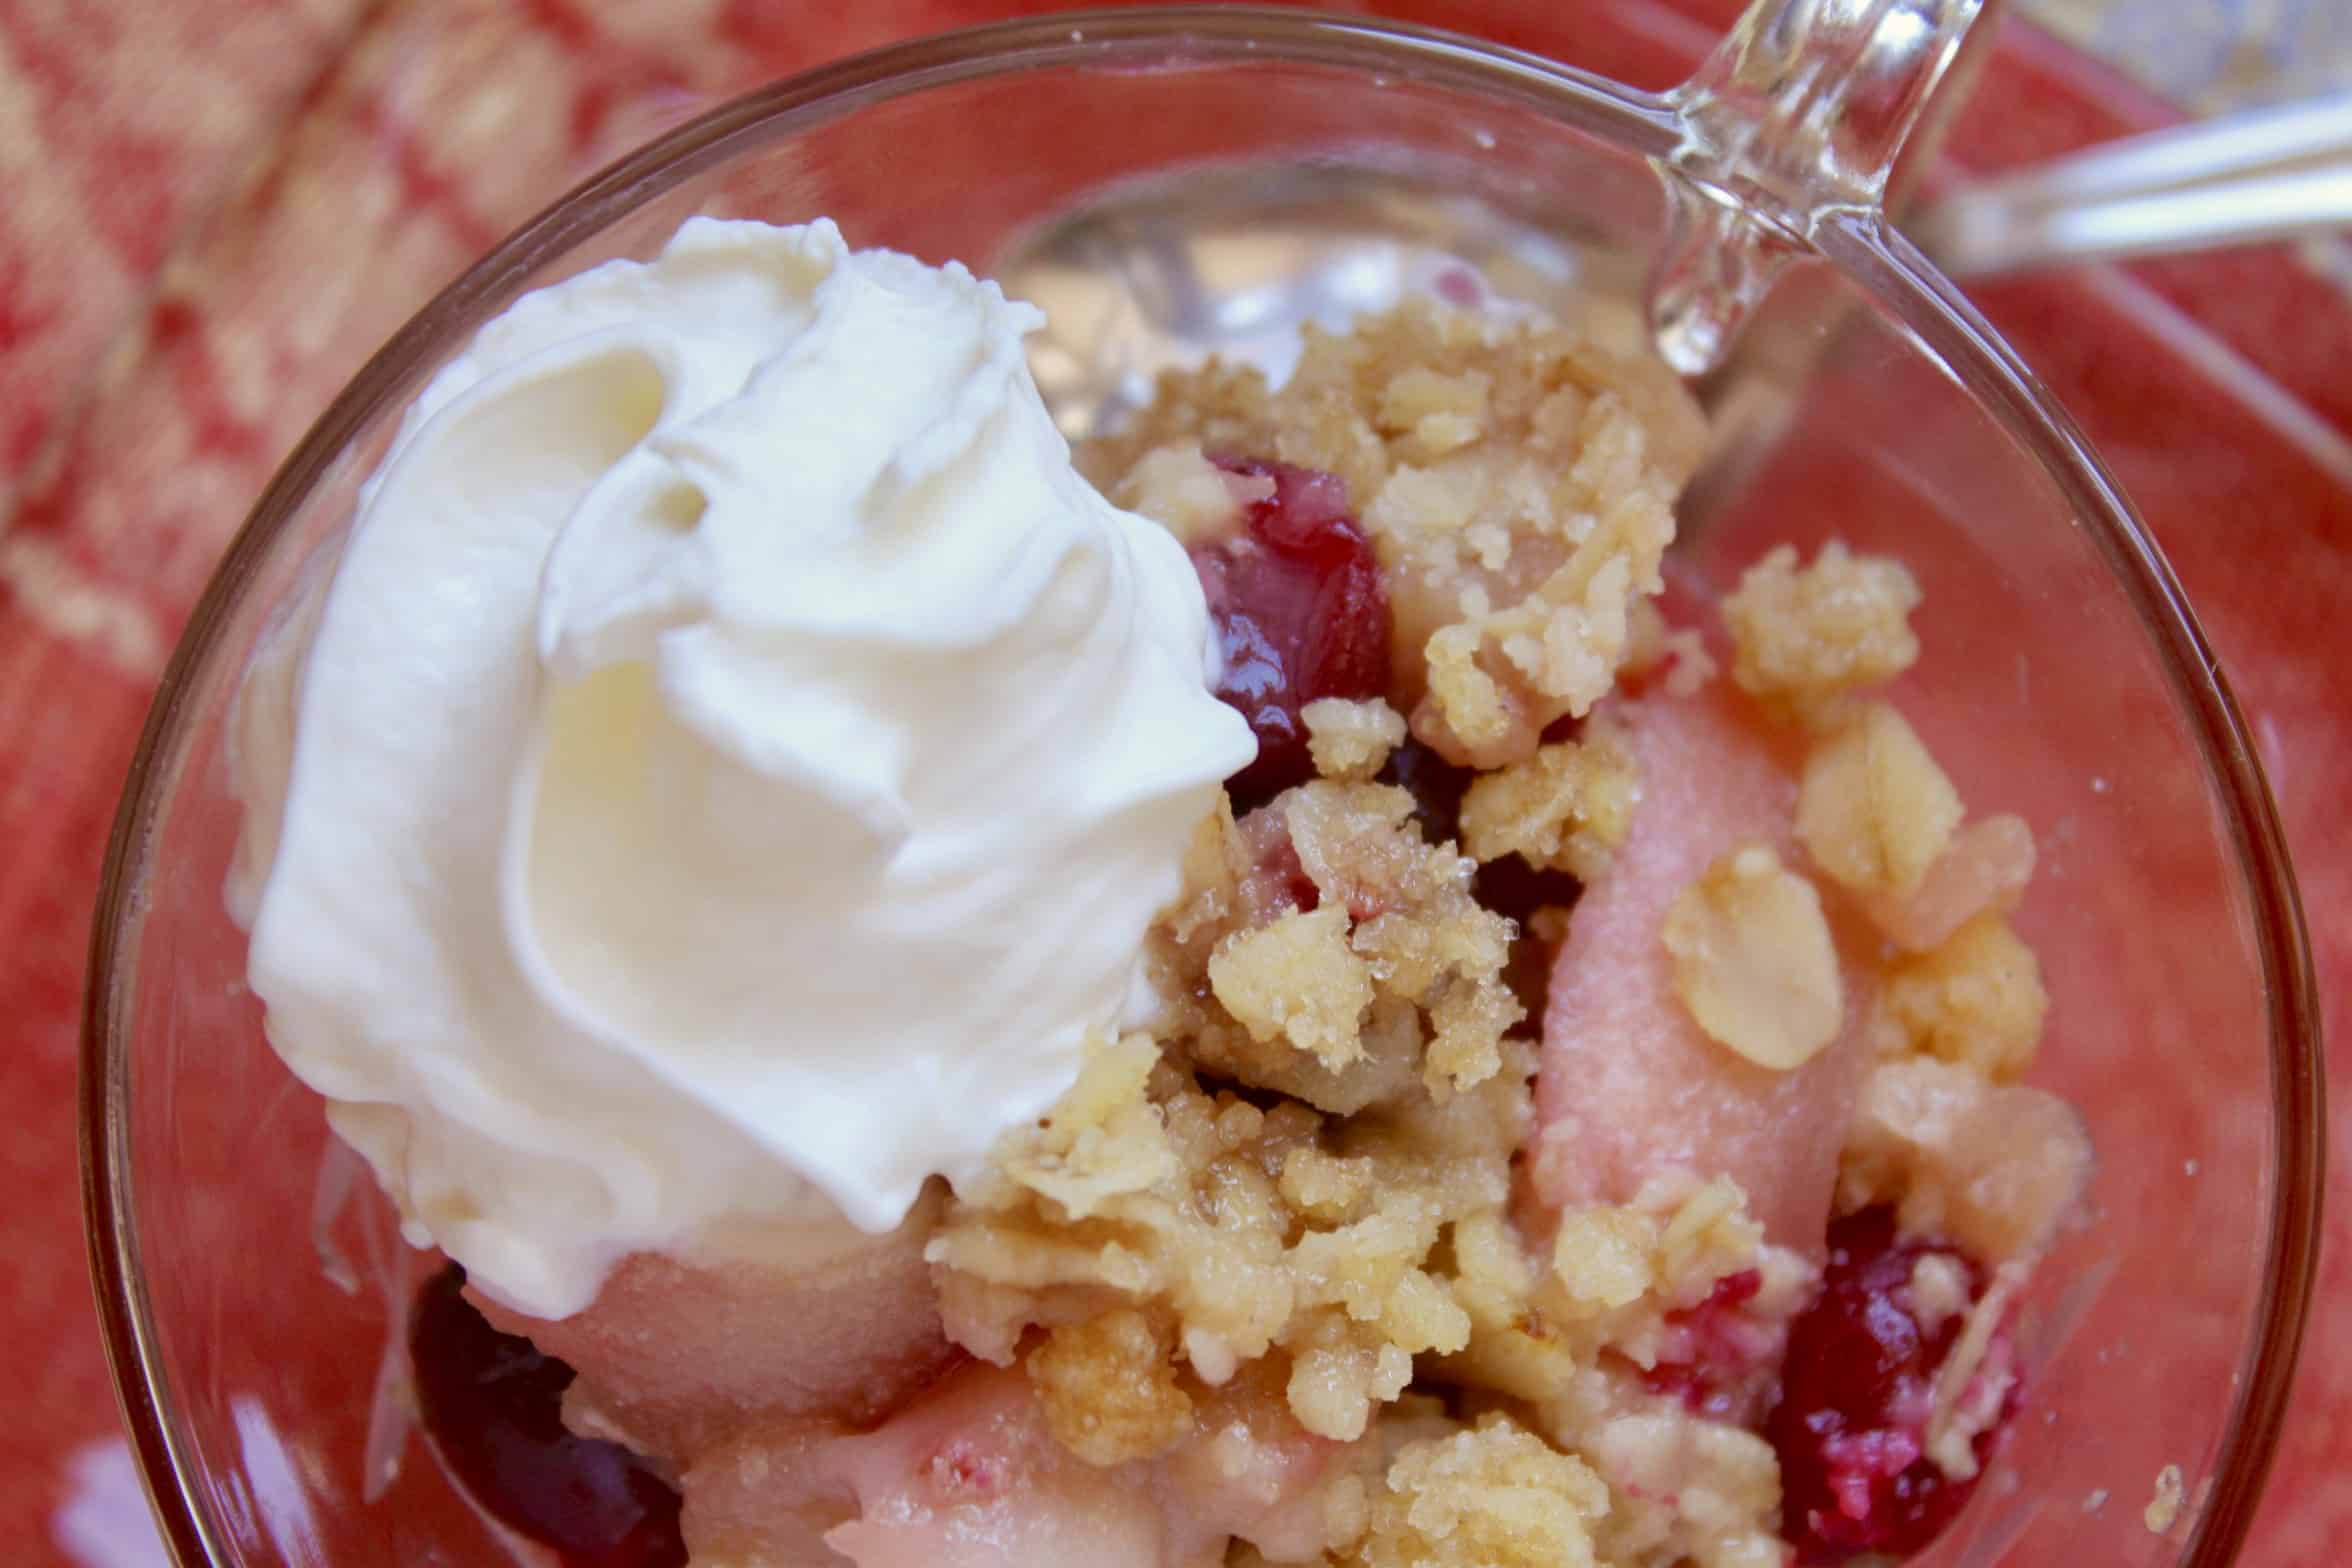 apple cranberry crisp in glass cup and saucer with cream